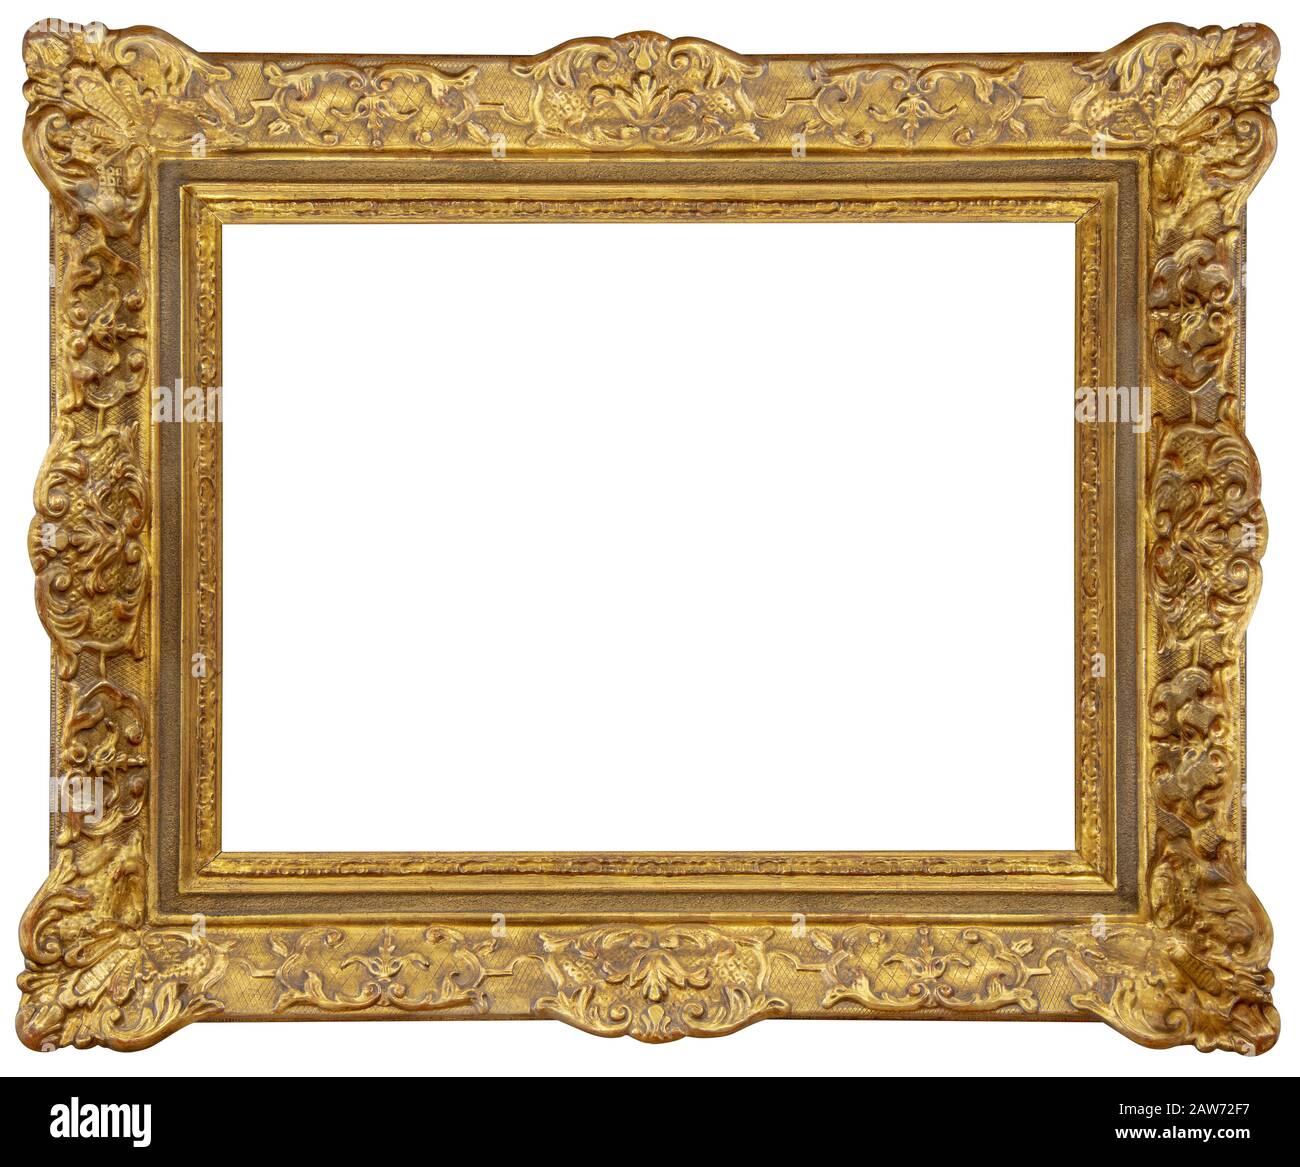 Rectangle Old gilded golden wooden frame isolated on white background Stock Photo